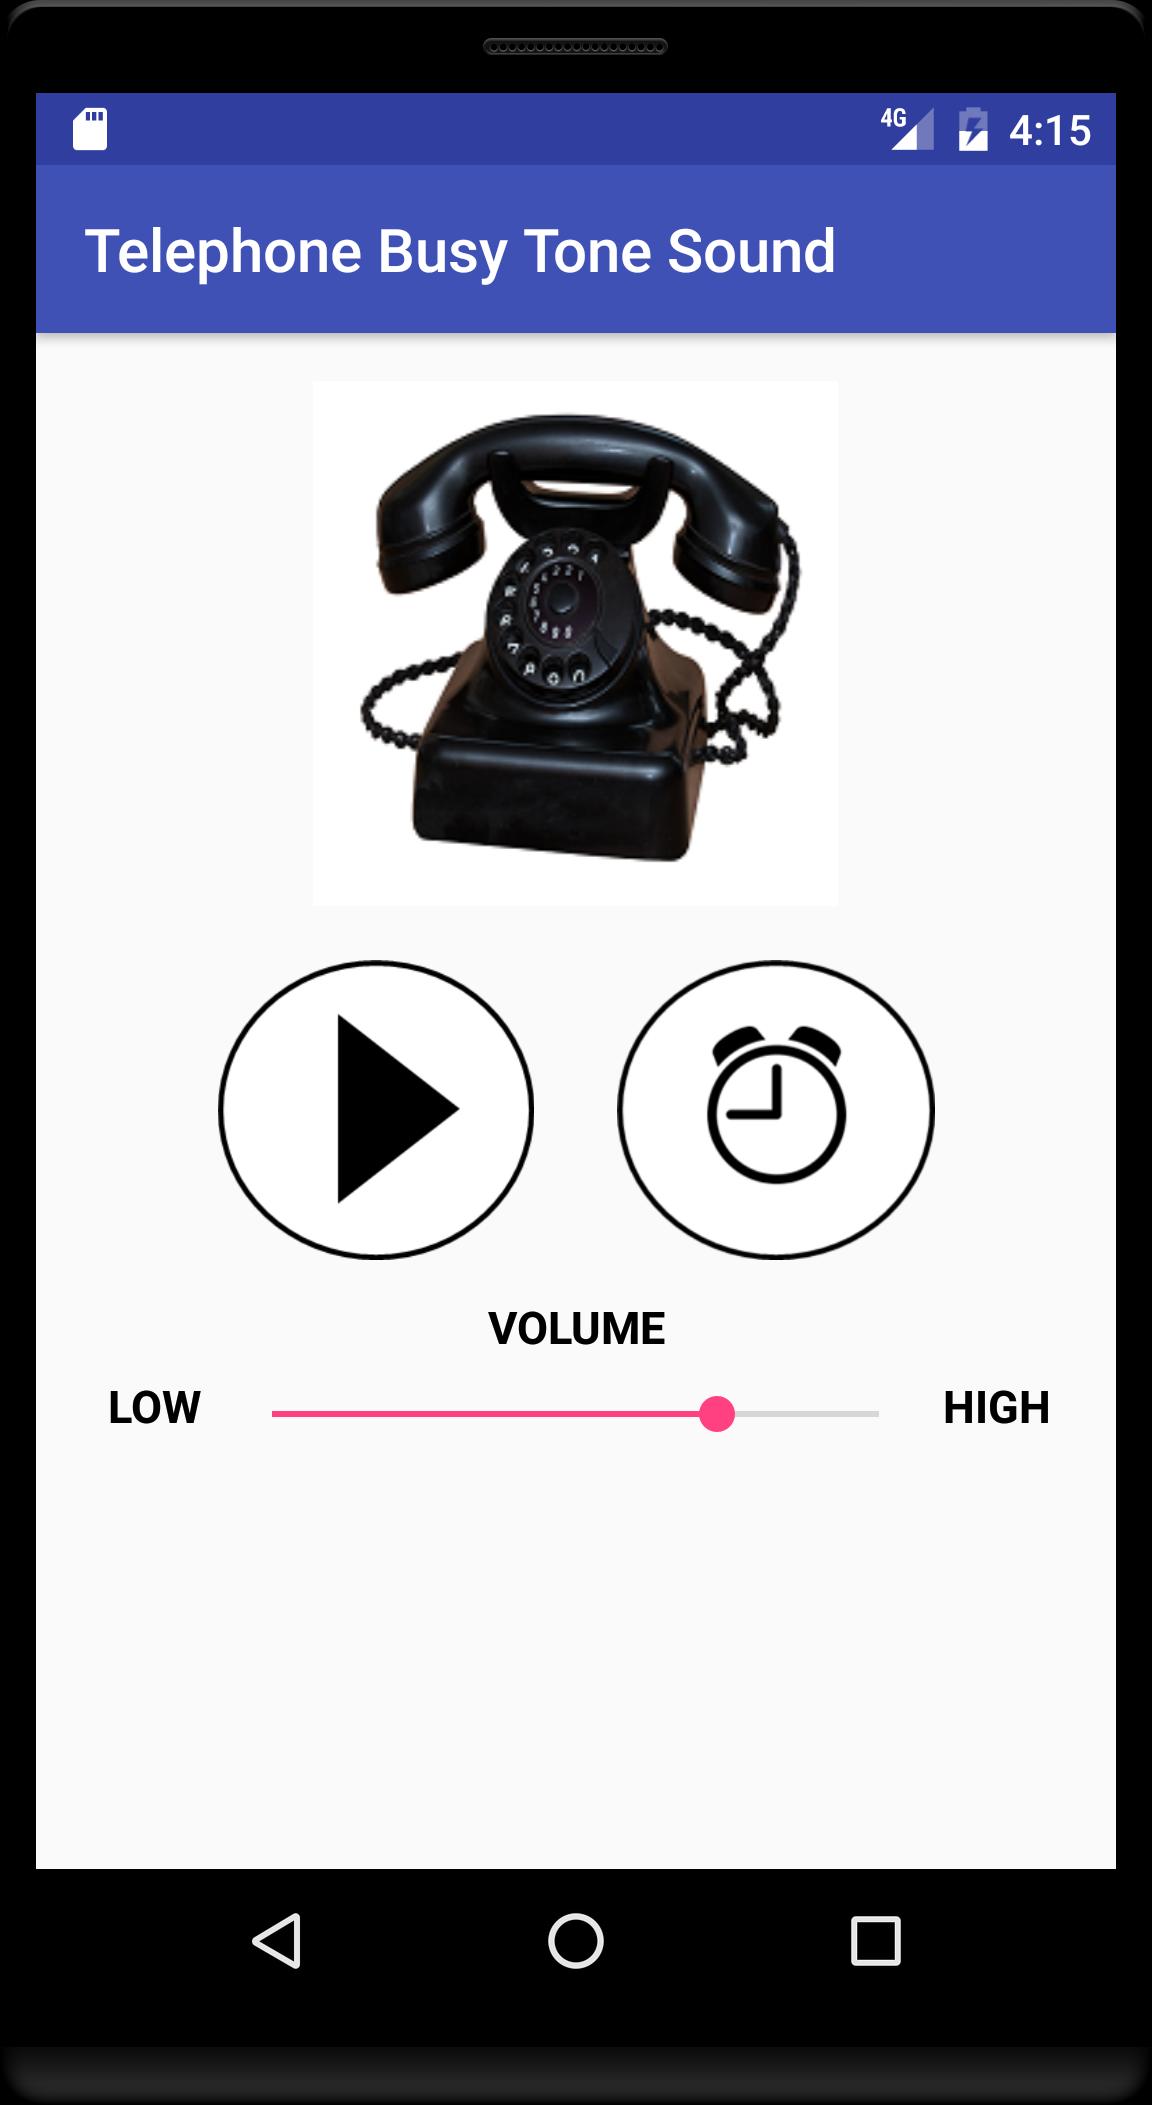 Telephone Busy Tone Sound for Android - APK Download